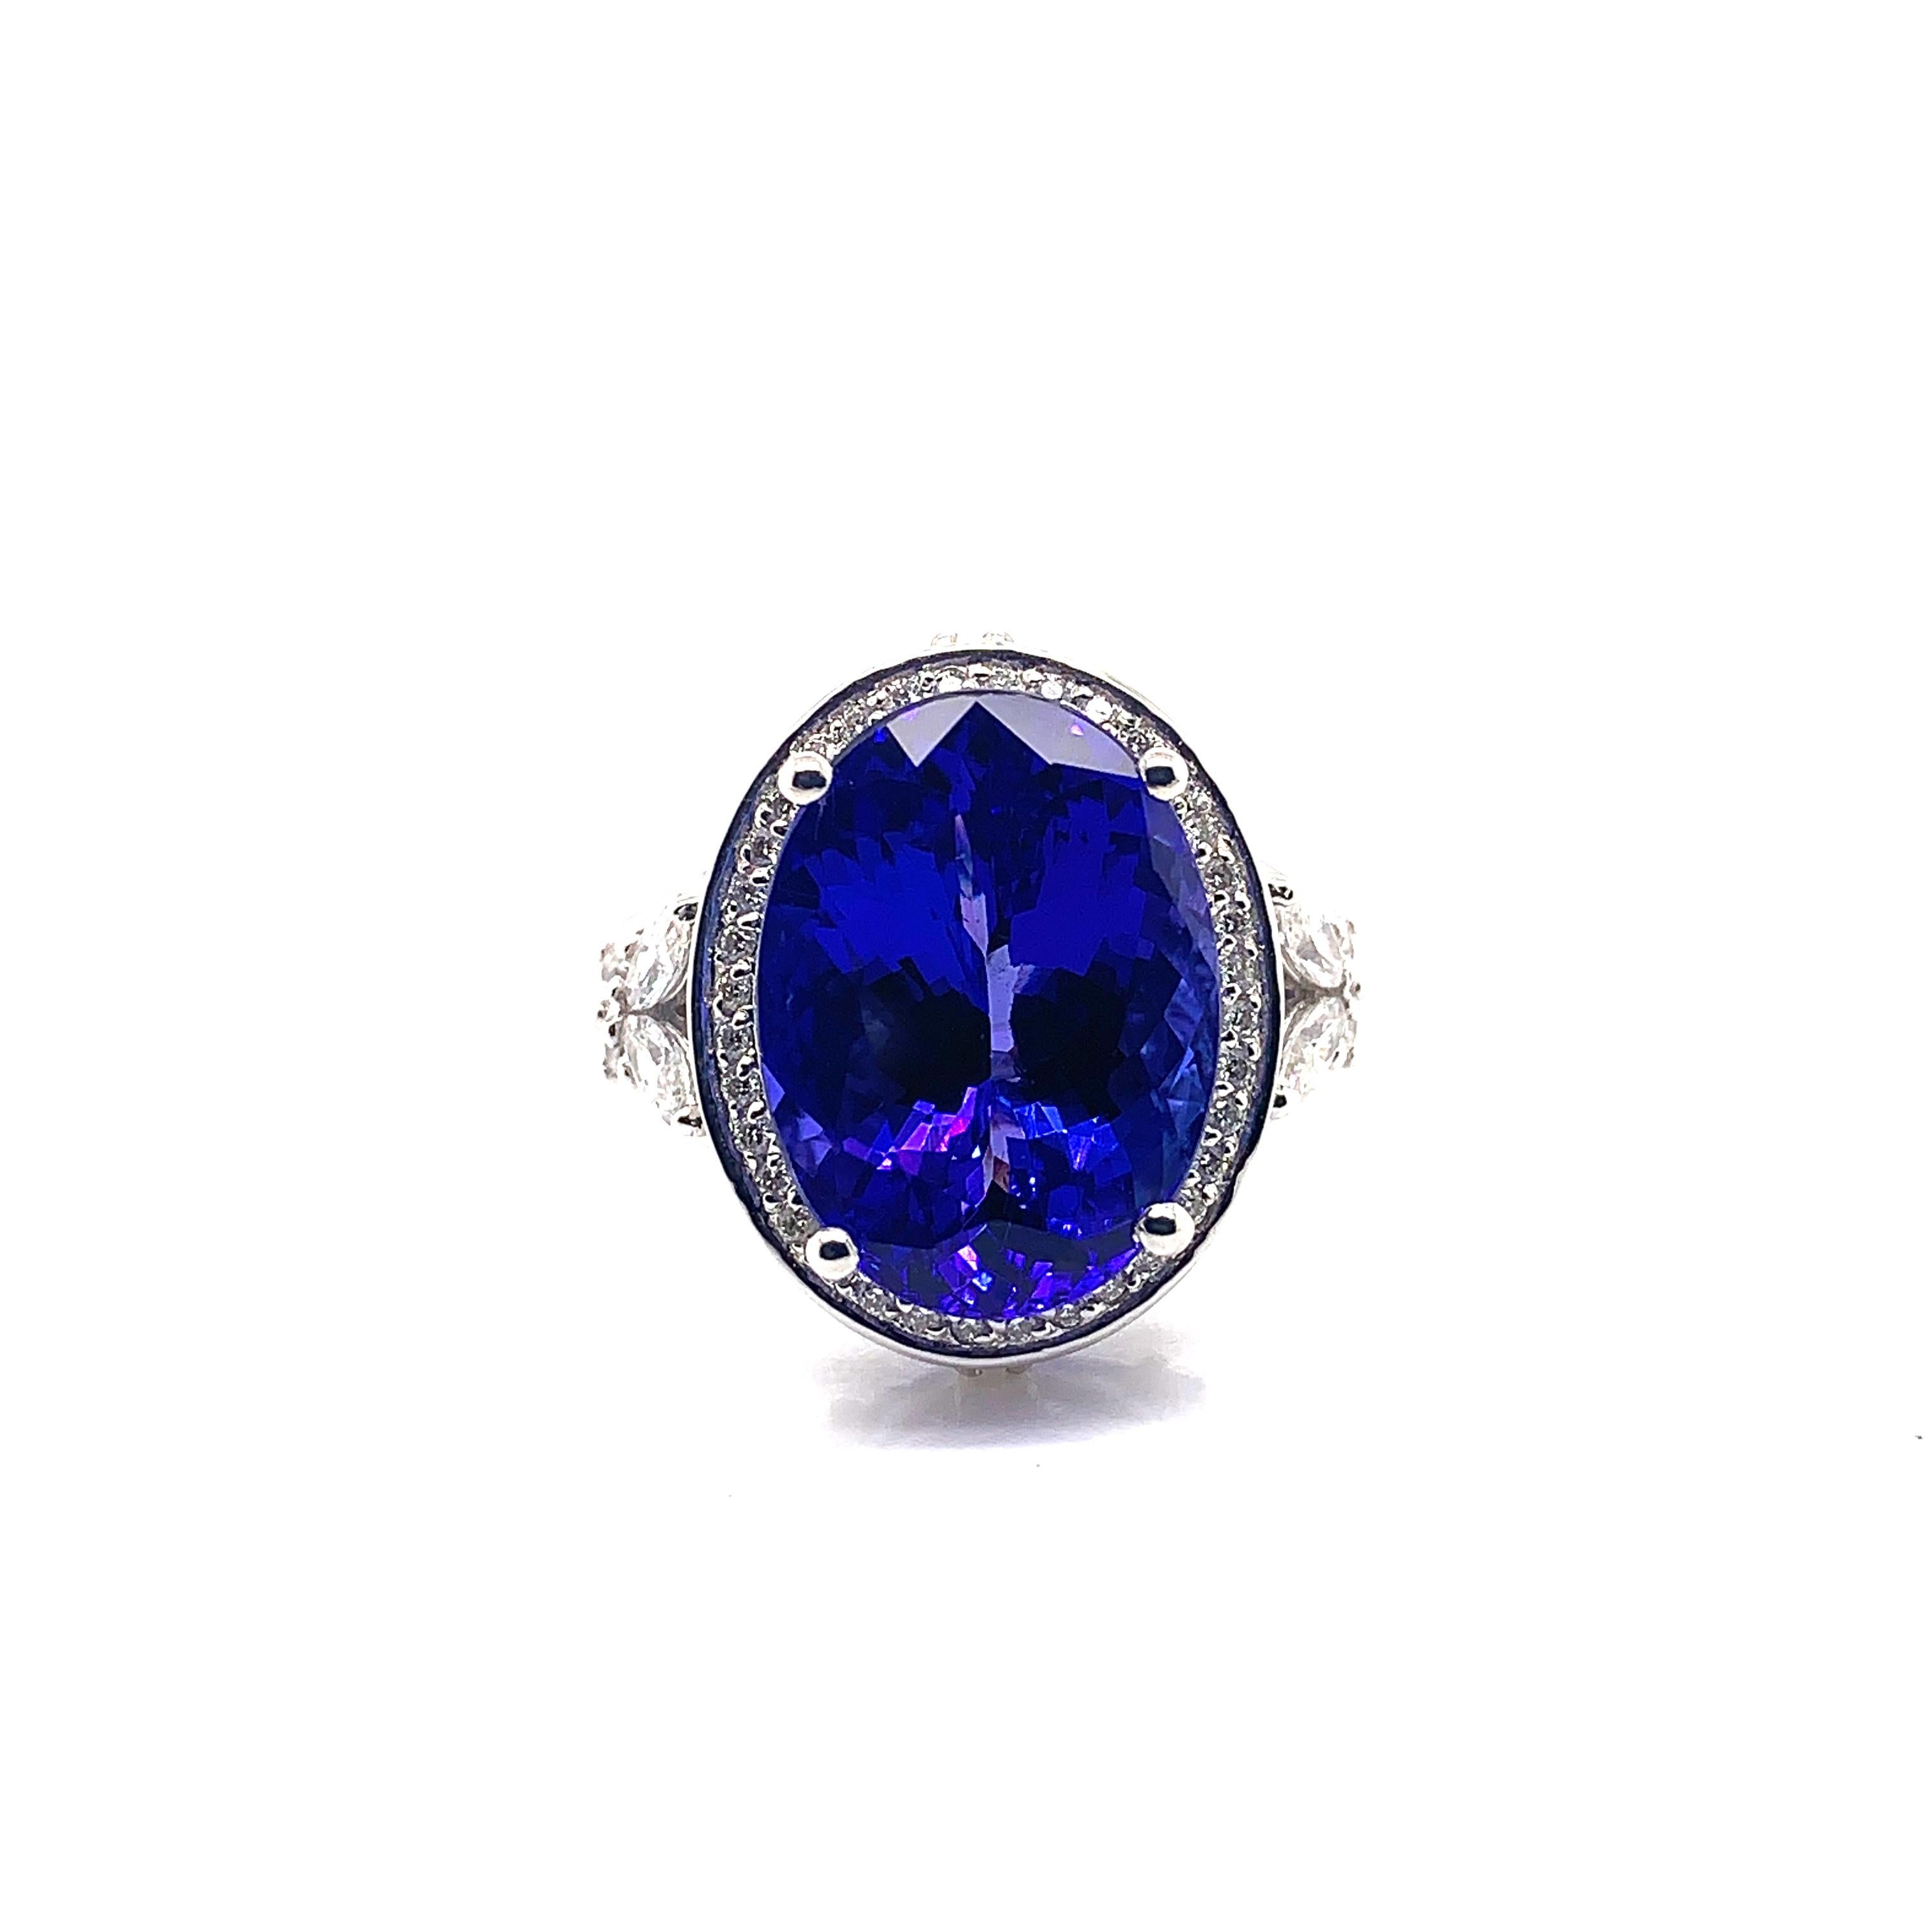 Classic tanzanite ring in 18K white gold with diamonds. 

Tanzanite: 9.01 carat oval shape.
Diamonds: 0.621 carat, G colour, VS clarity. 
Gold: 5.65g, 18K white gold. 